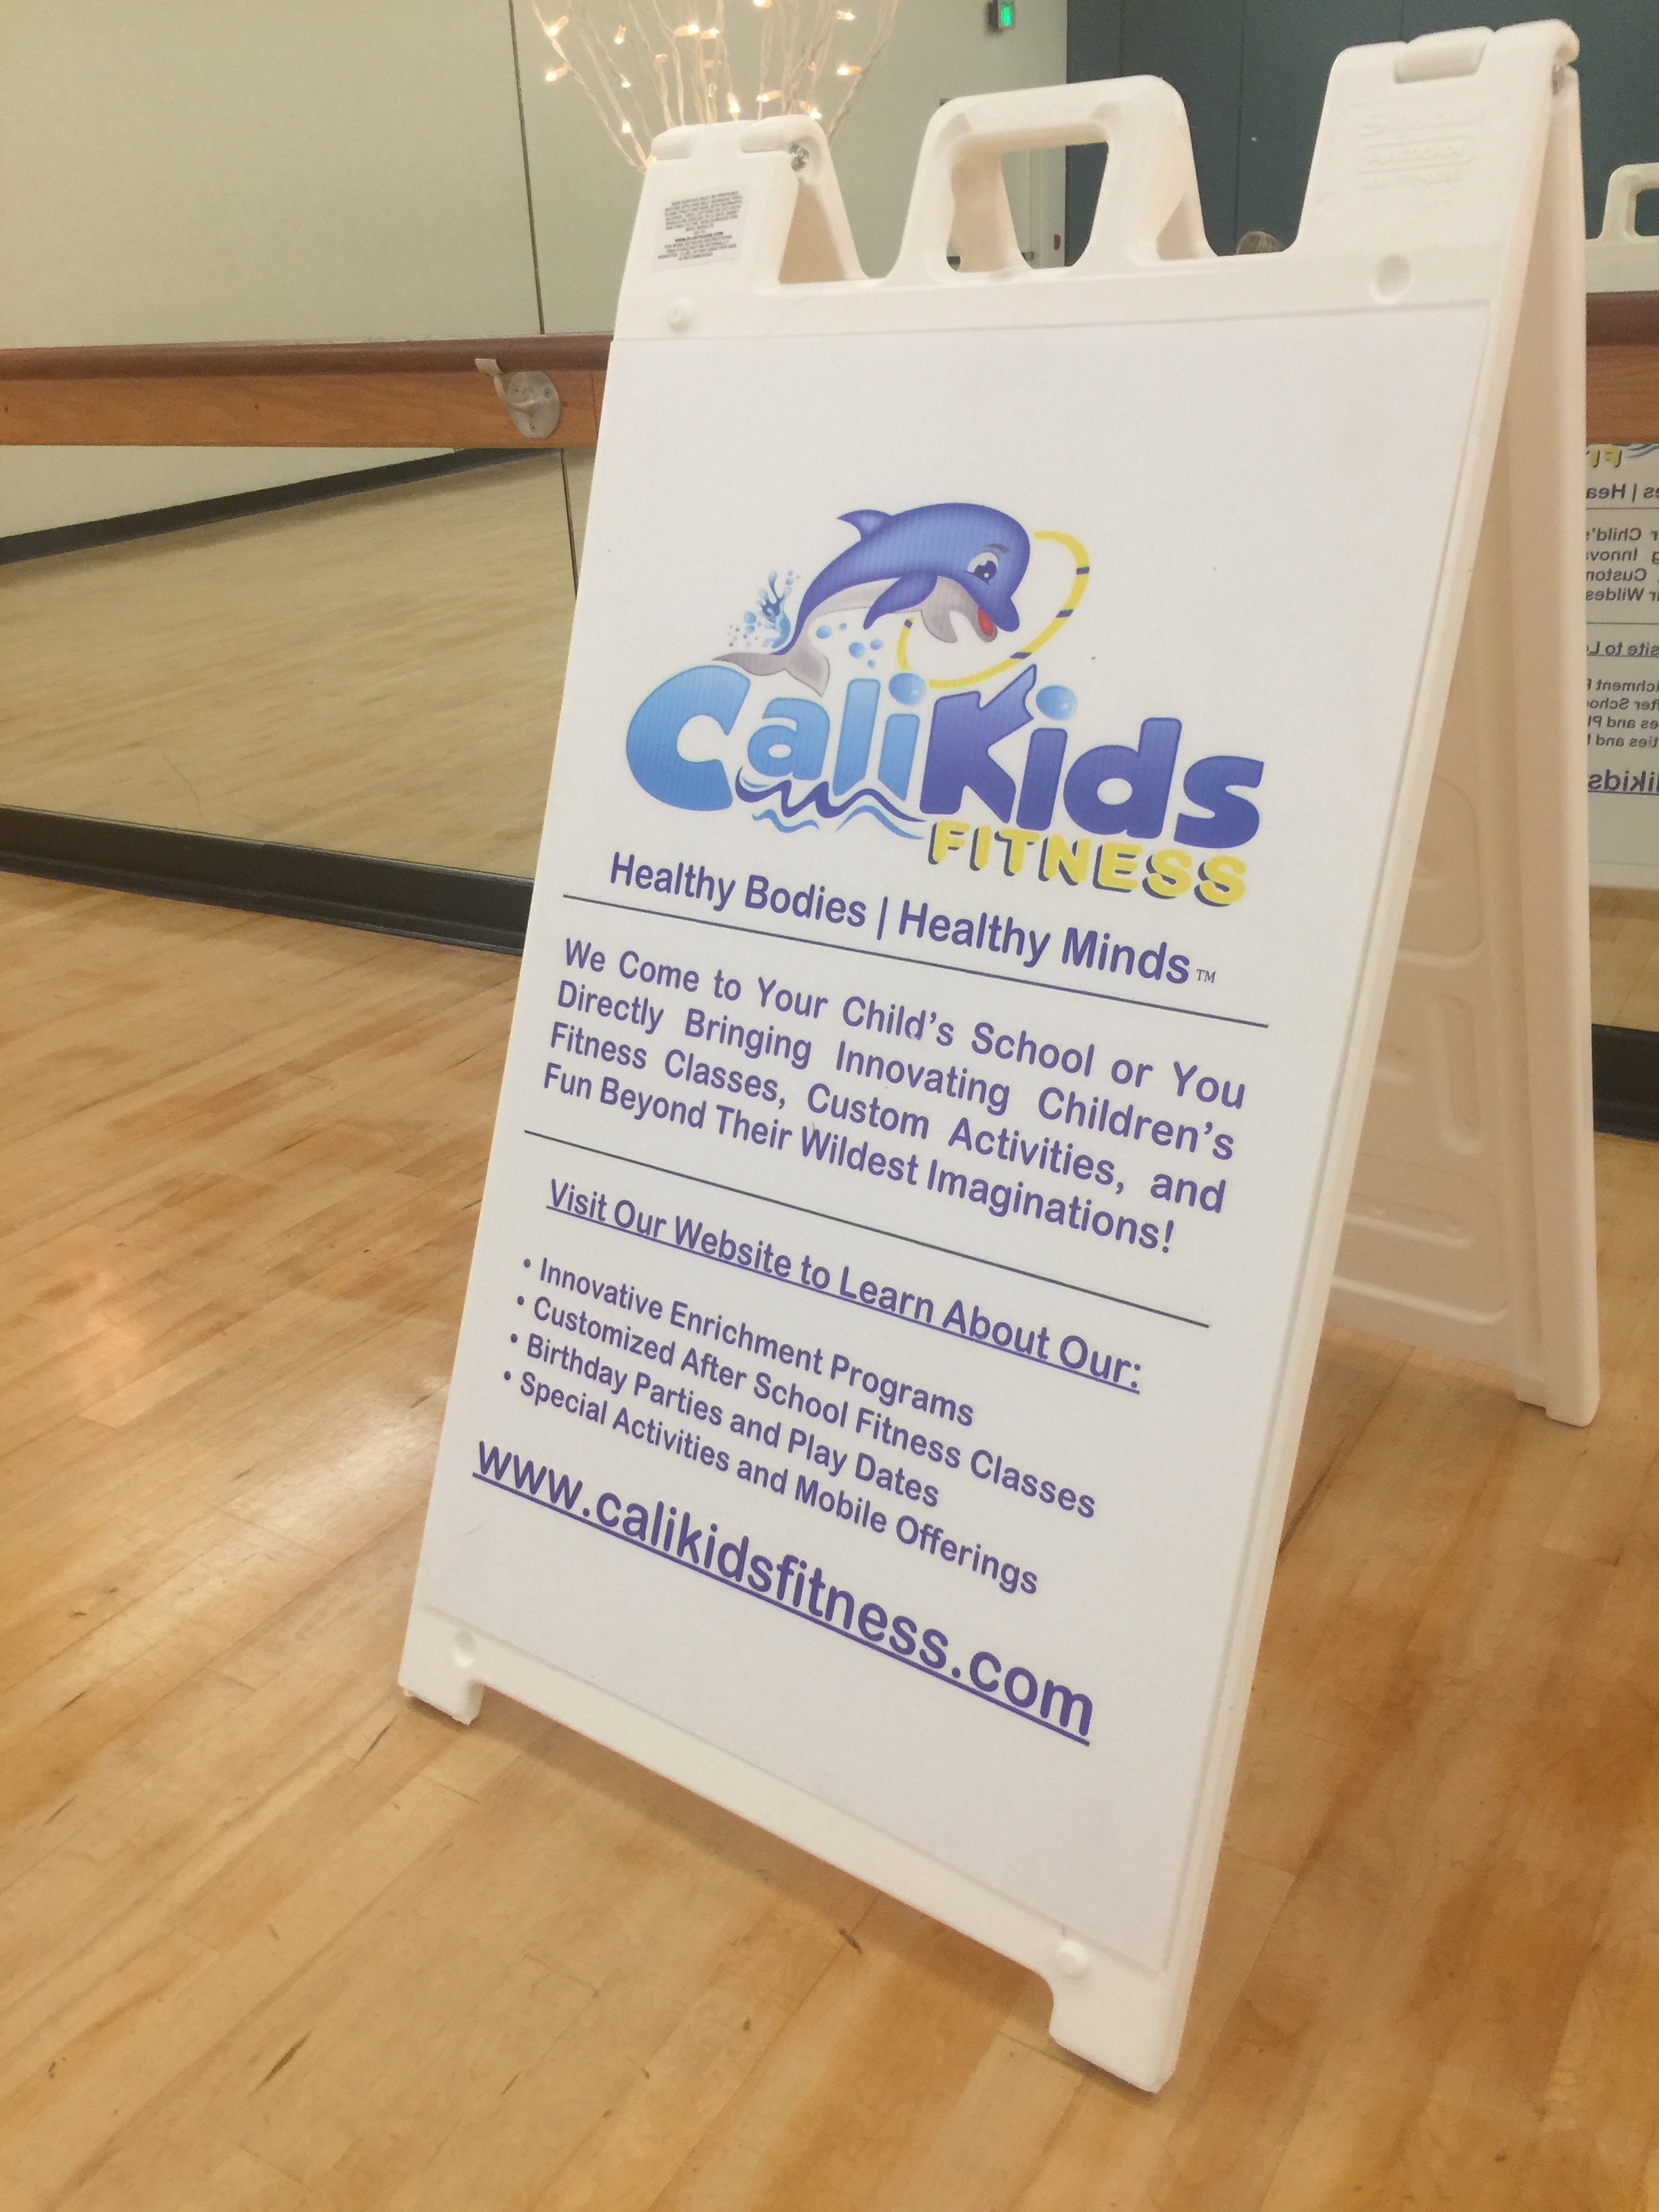 Calikids Fitness Class in Paso Robles